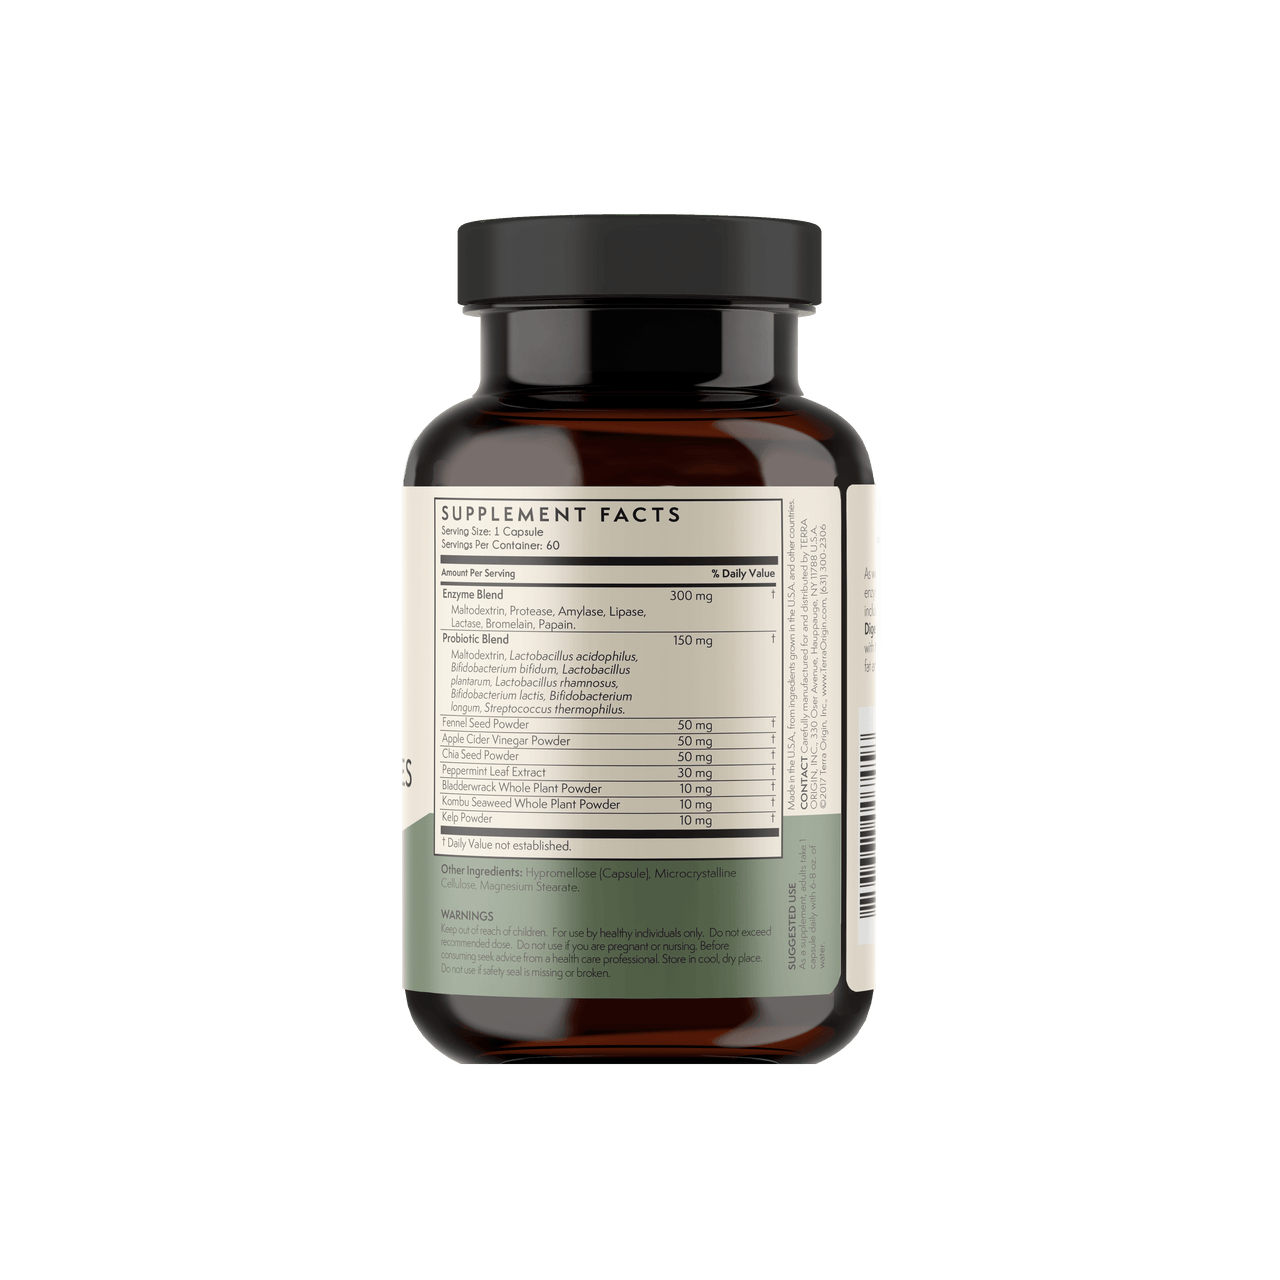 Digestive Enzyme Capsules